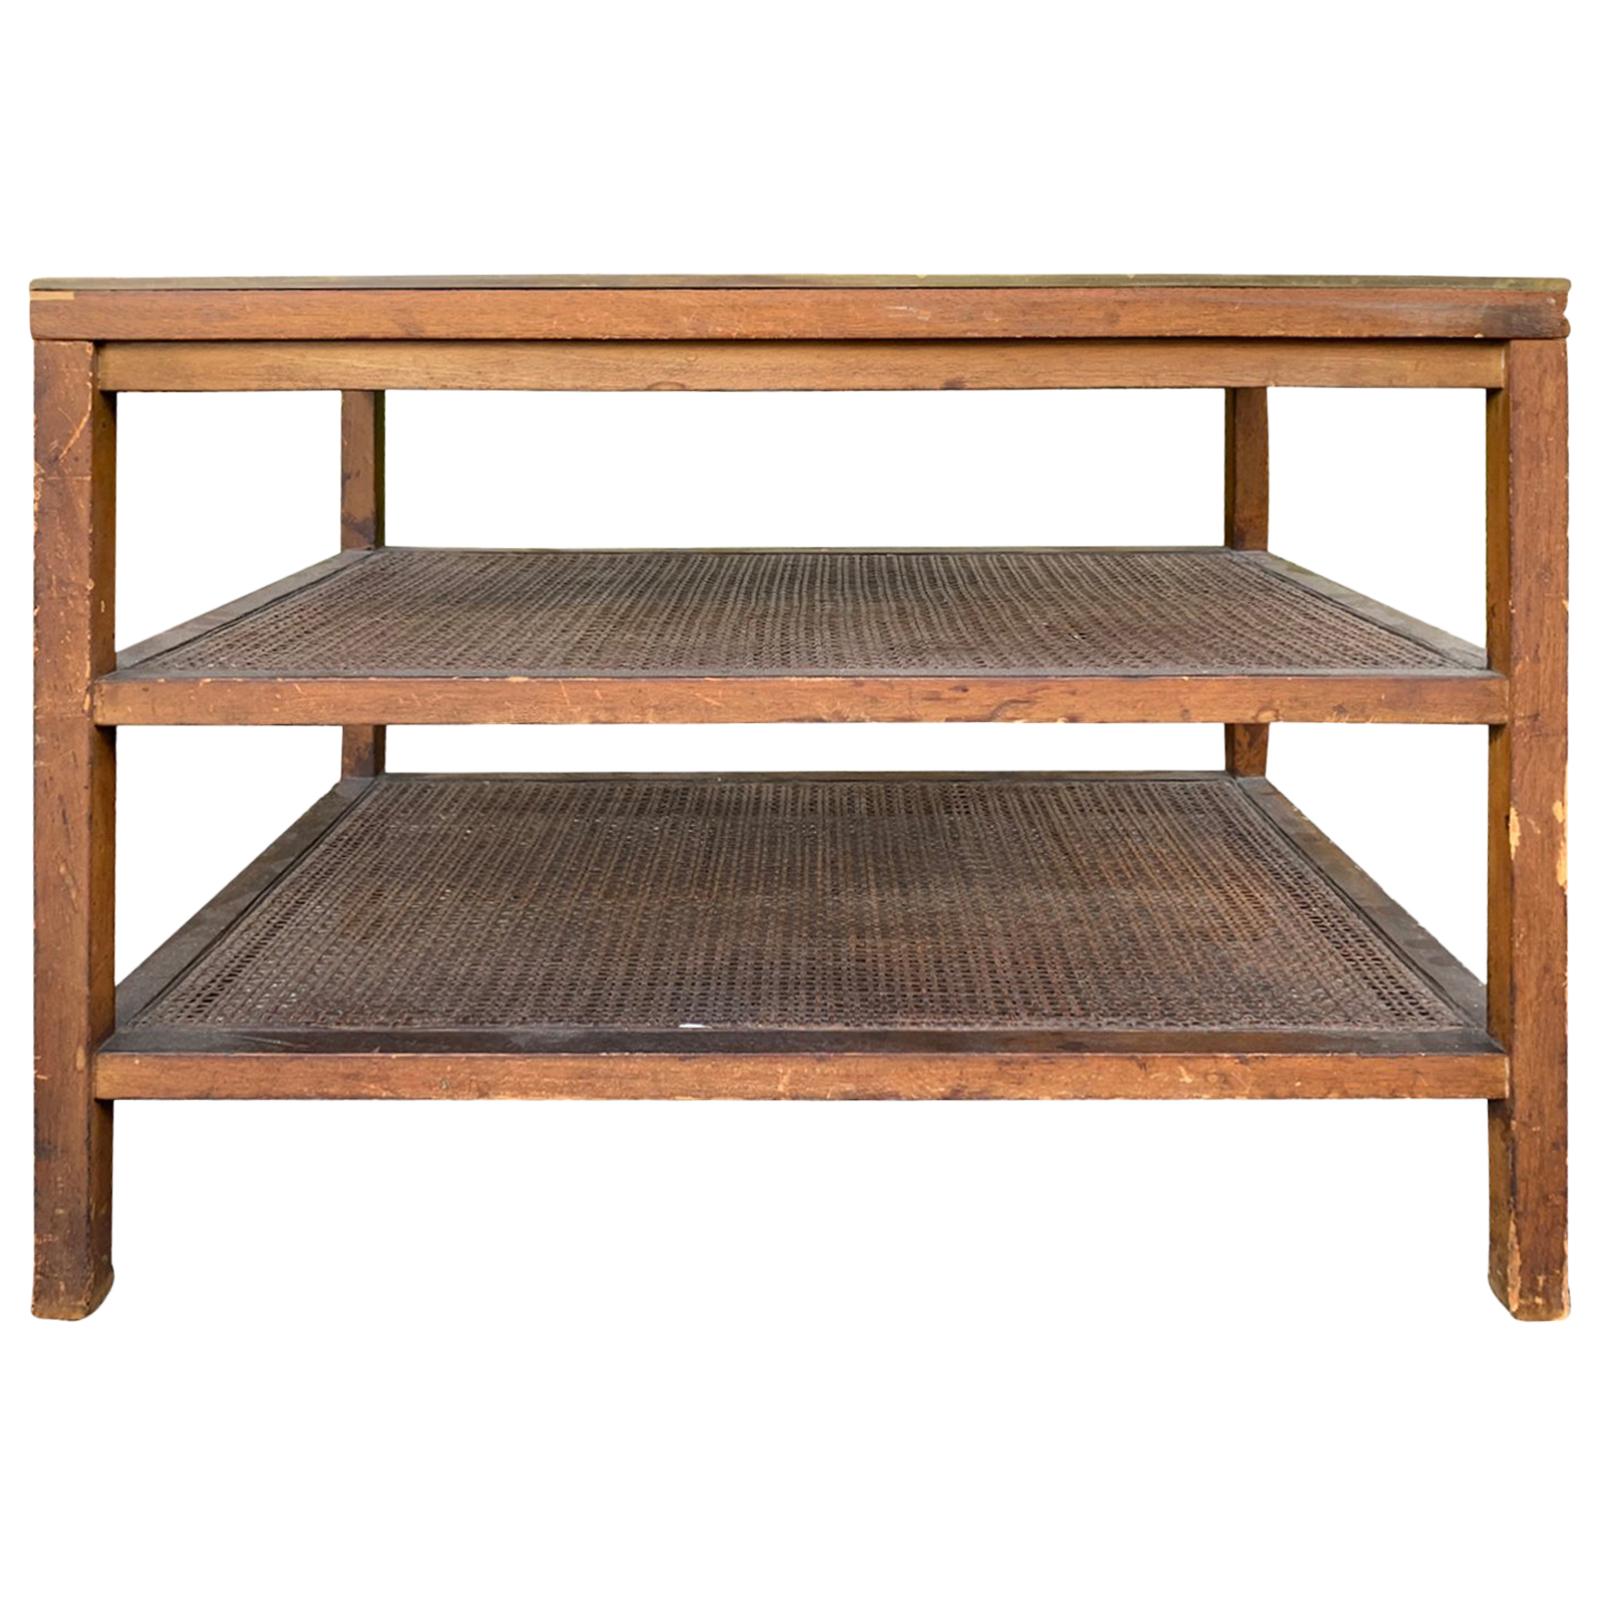 Mid-20th Century Paul McCobb Three-Tier Table, Leather Top, Cane Shelves, Marked For Sale